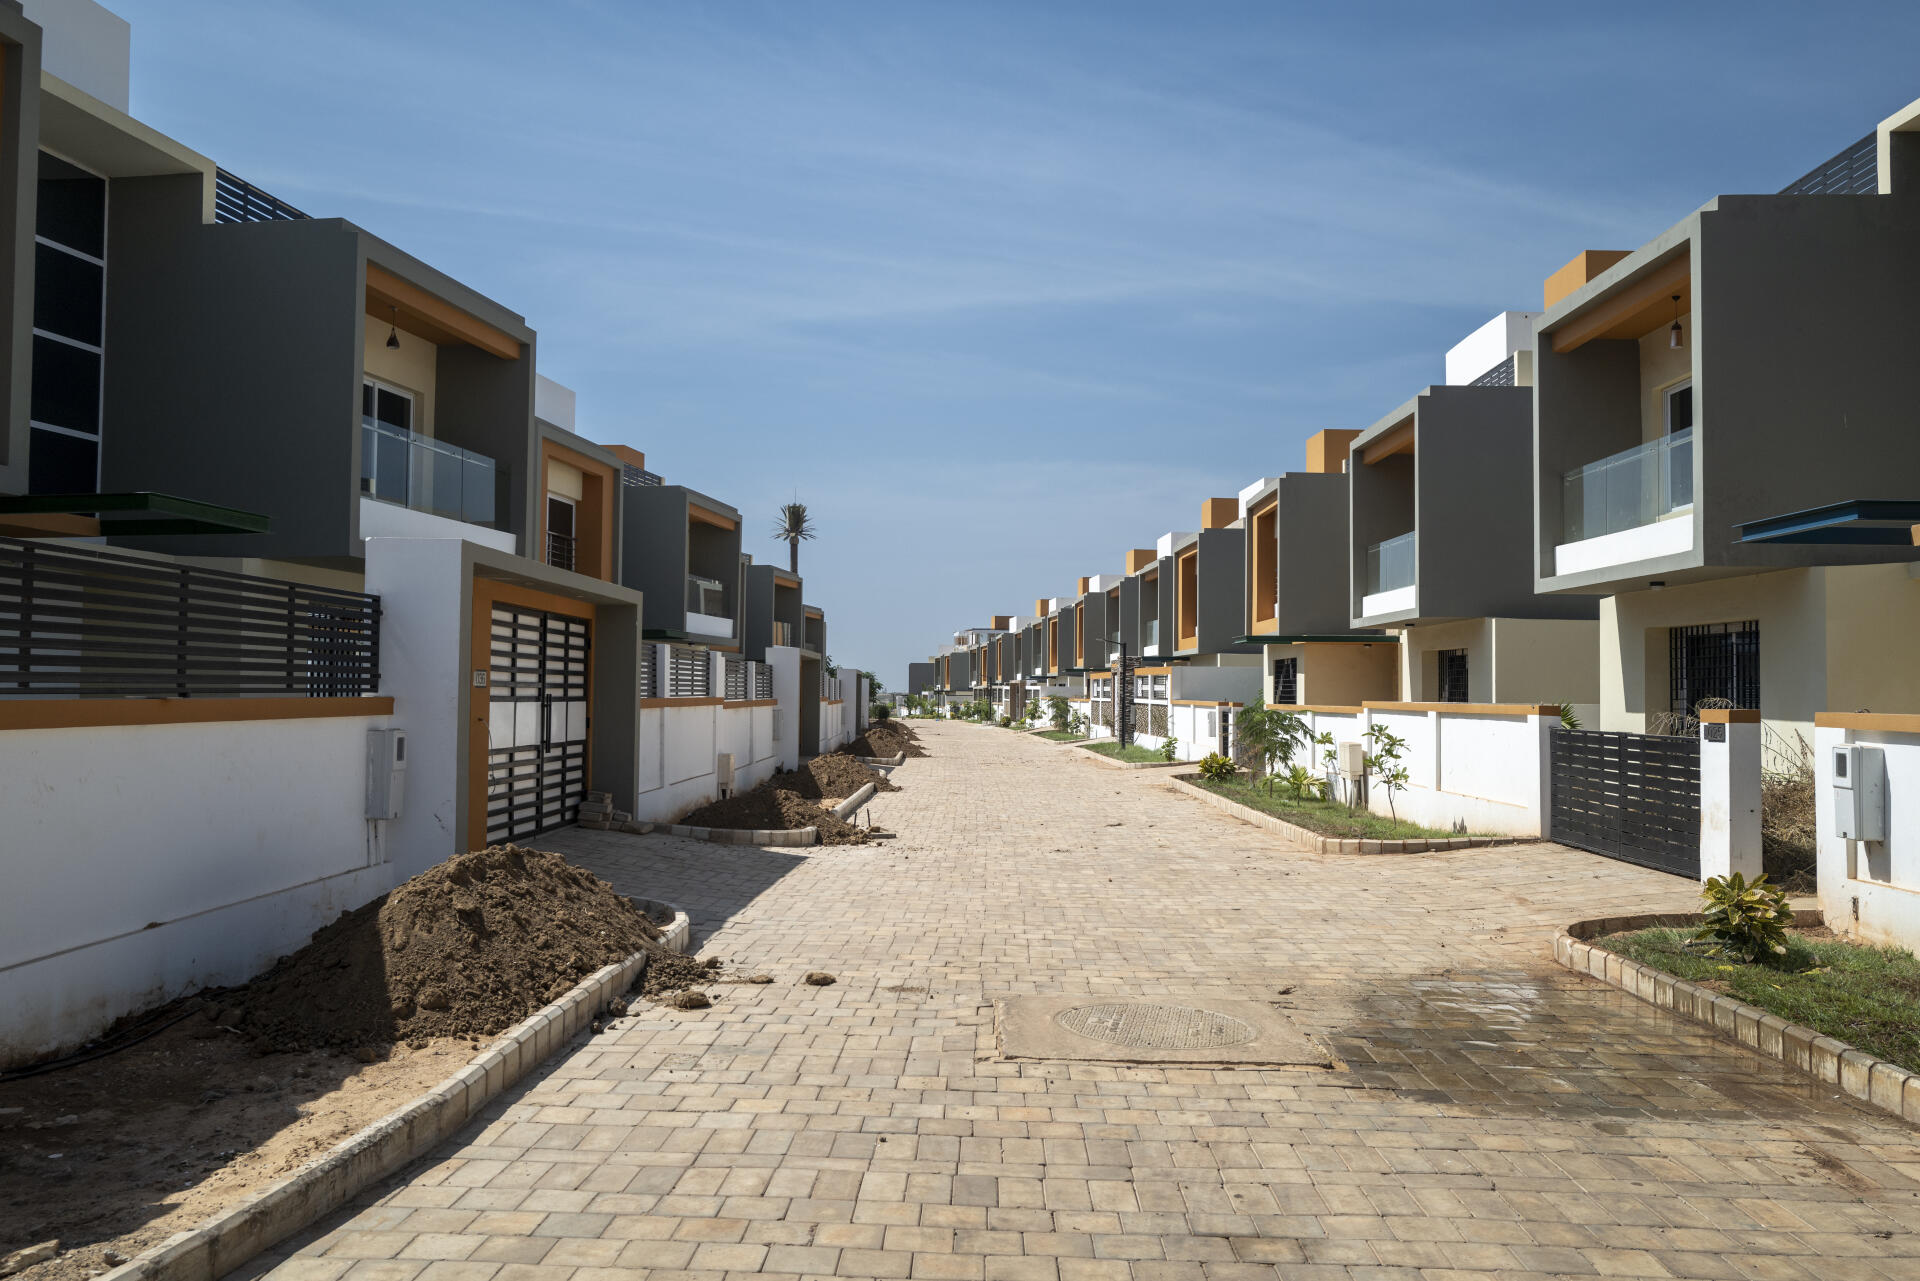 A view of the SD-City residential and commercial complex of Senegindia. Diamniadio (Senegal), November 26, 2021.